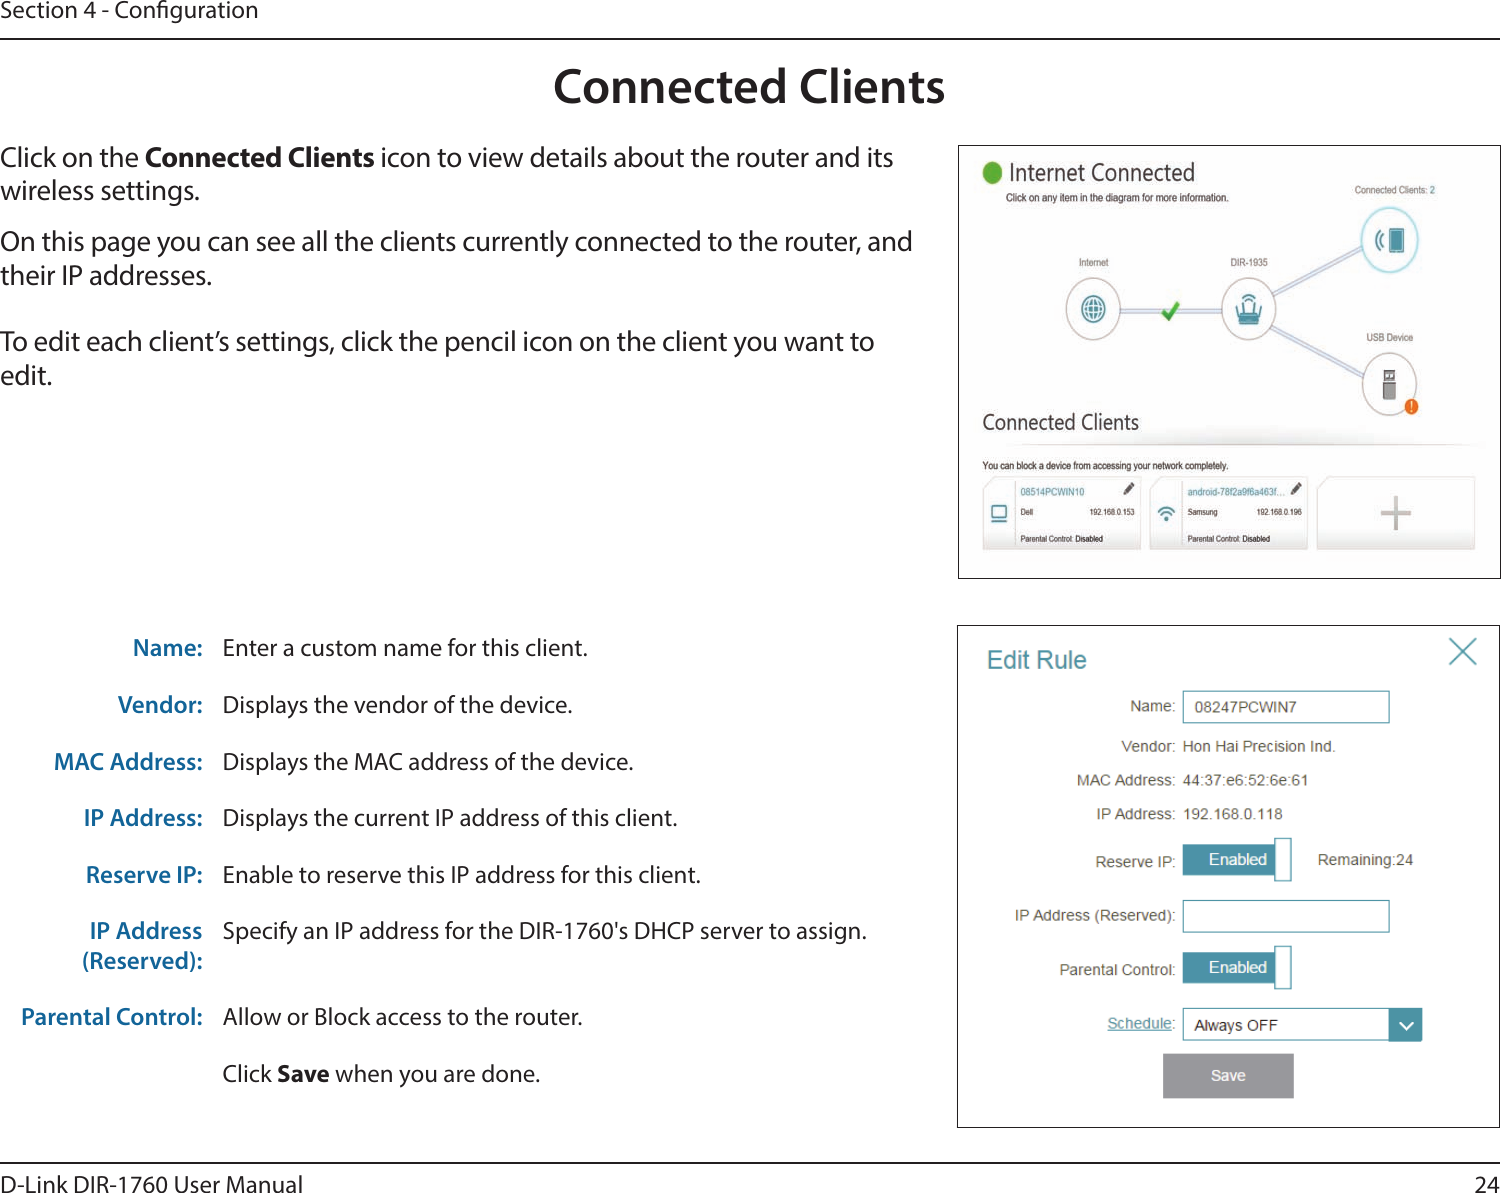 24D-Link DIR-1760 User ManualSection 4 - CongurationConnected ClientsClick on the Connected Clients icon to view details about the router and its wireless settings.On this page you can see all the clients currently connected to the router, and their IP addresses.To edit each client’s settings, click the pencil icon on the client you want to edit.Name: Enter a custom name for this client.Vendor: Displays the vendor of the device.MAC Address: Displays the MAC address of the device.IP Address: Displays the current IP address of this client.Reserve IP: Enable to reserve this IP address for this client.IP Address (Reserved):Specify an IP address for the DIR-1760&apos;s DHCP server to assign.Parental Control: Allow or Block access to the router.Click Save when you are done.